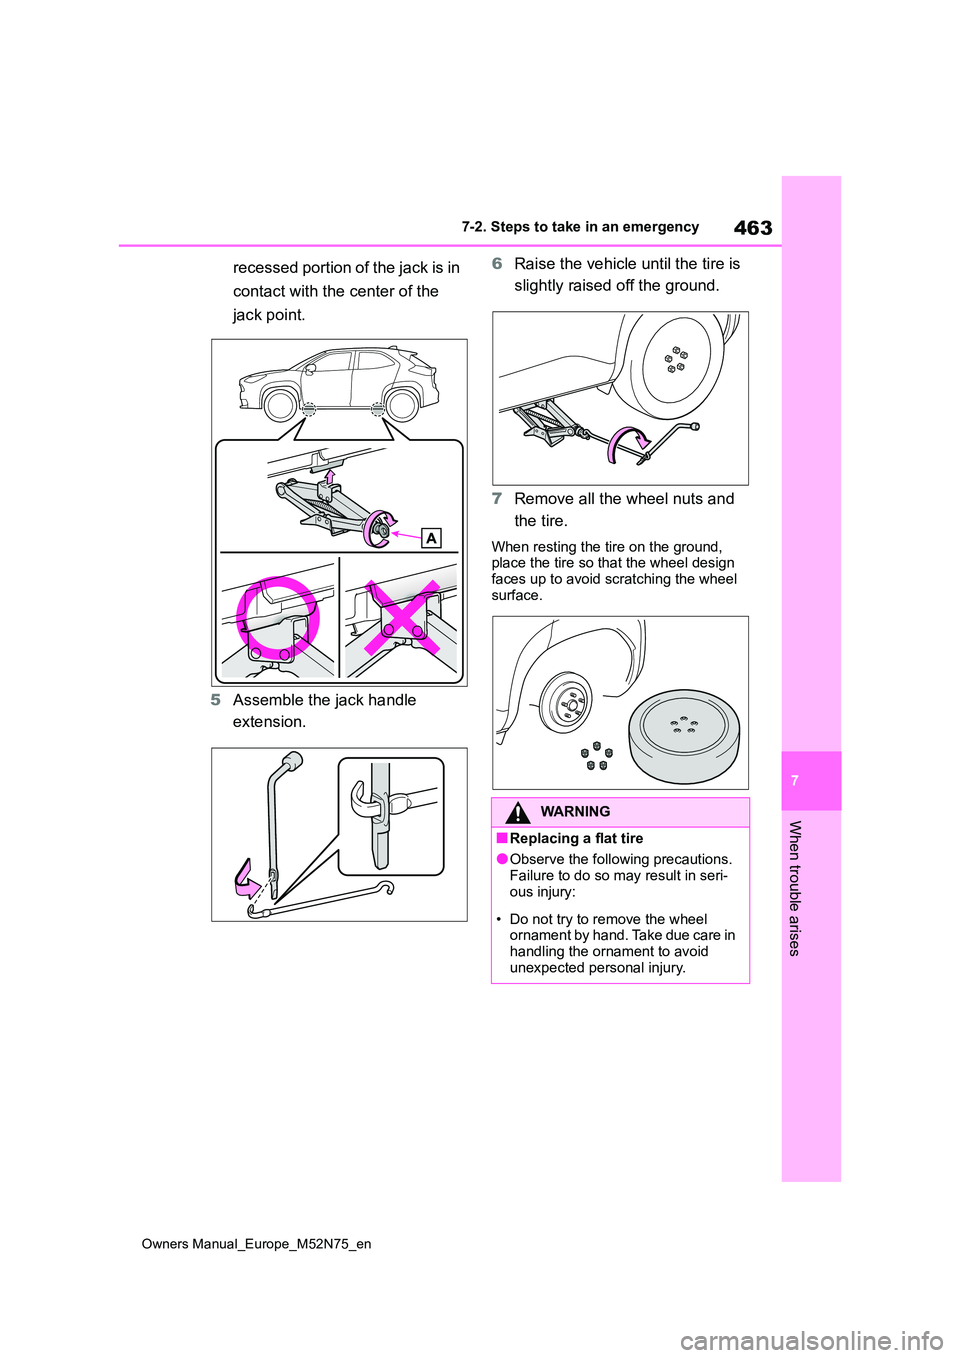 TOYOTA YARIS CROSS 2023 Service Manual 463
7
Owners Manual_Europe_M52N75_en
7-2. Steps to take in an emergency
When trouble arises
recessed portion of the jack is in  
contact with the center of the 
jack point. 
5 Assemble the jack handle